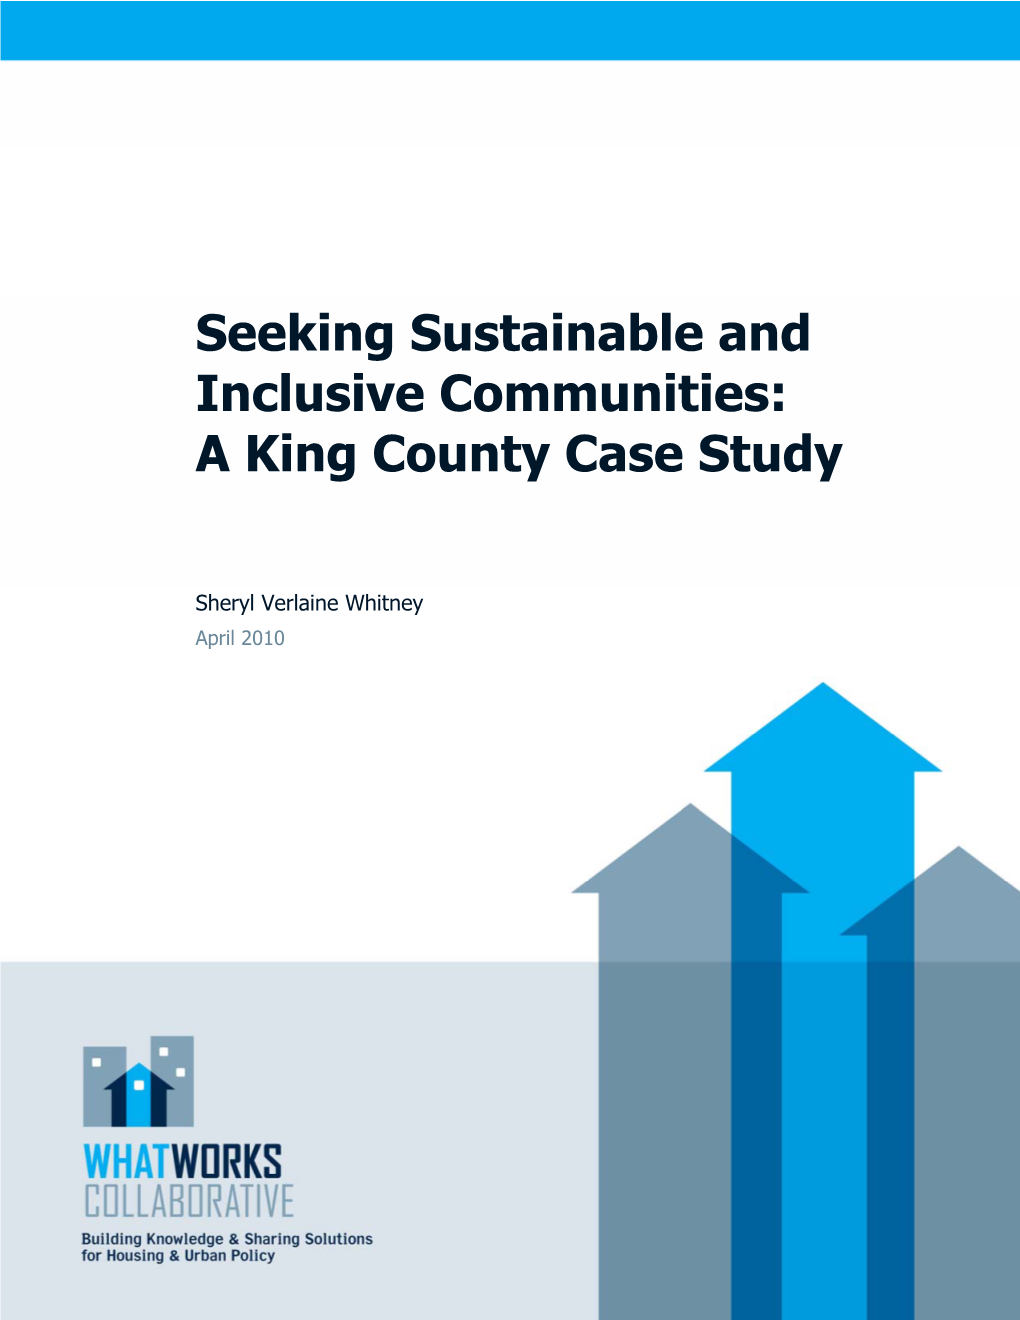 Seeking Sustainable and Inclusive Communities: a King County Case Study